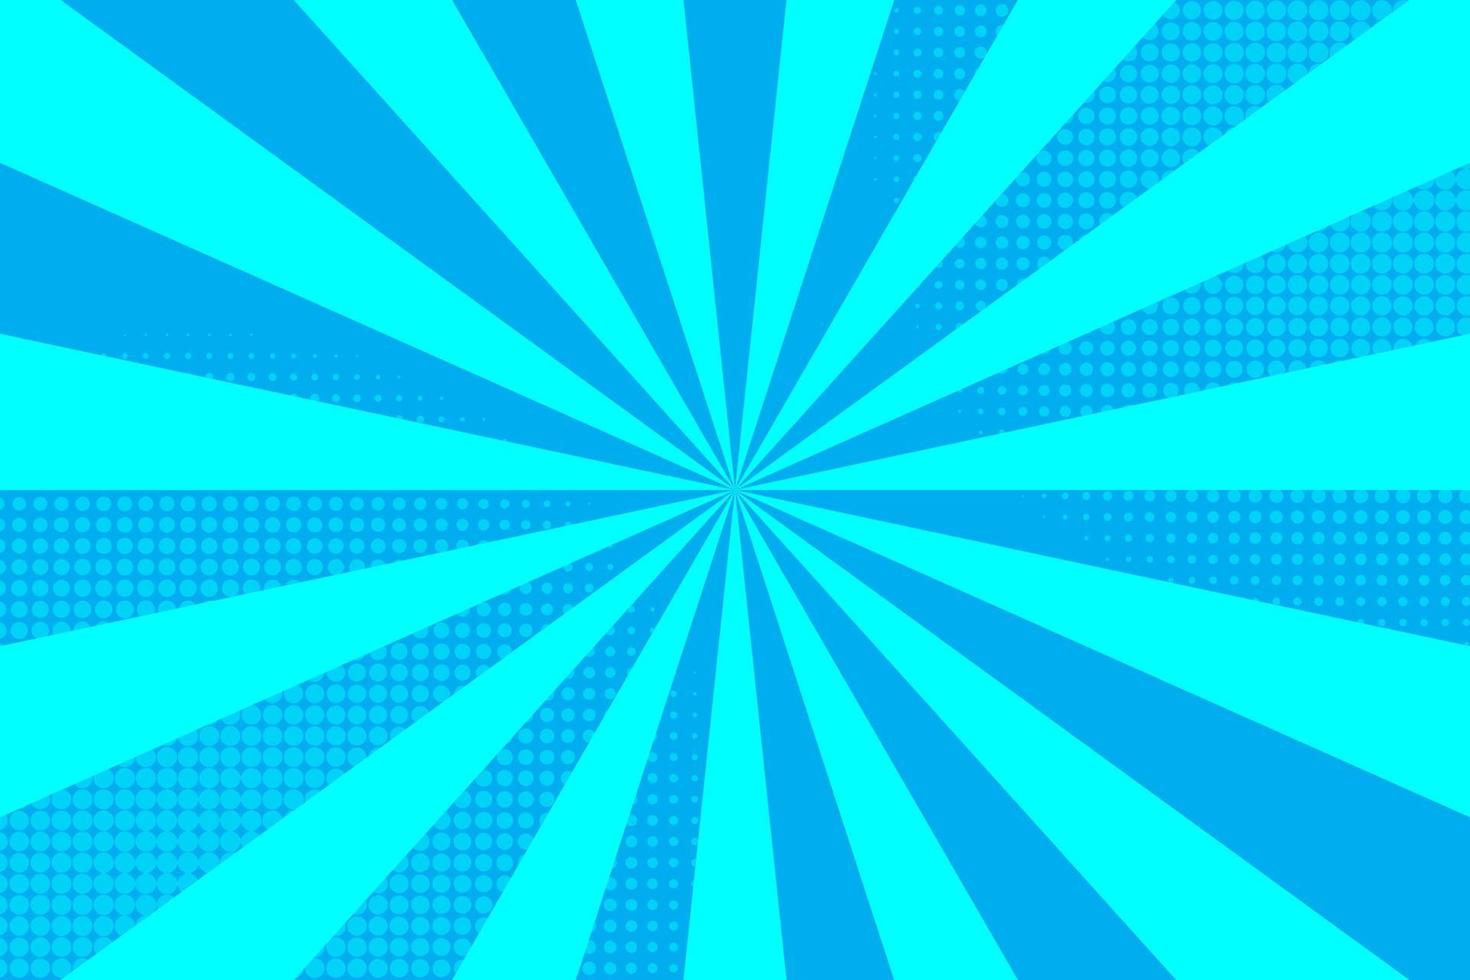 Flat blue comic style background with halftone vector